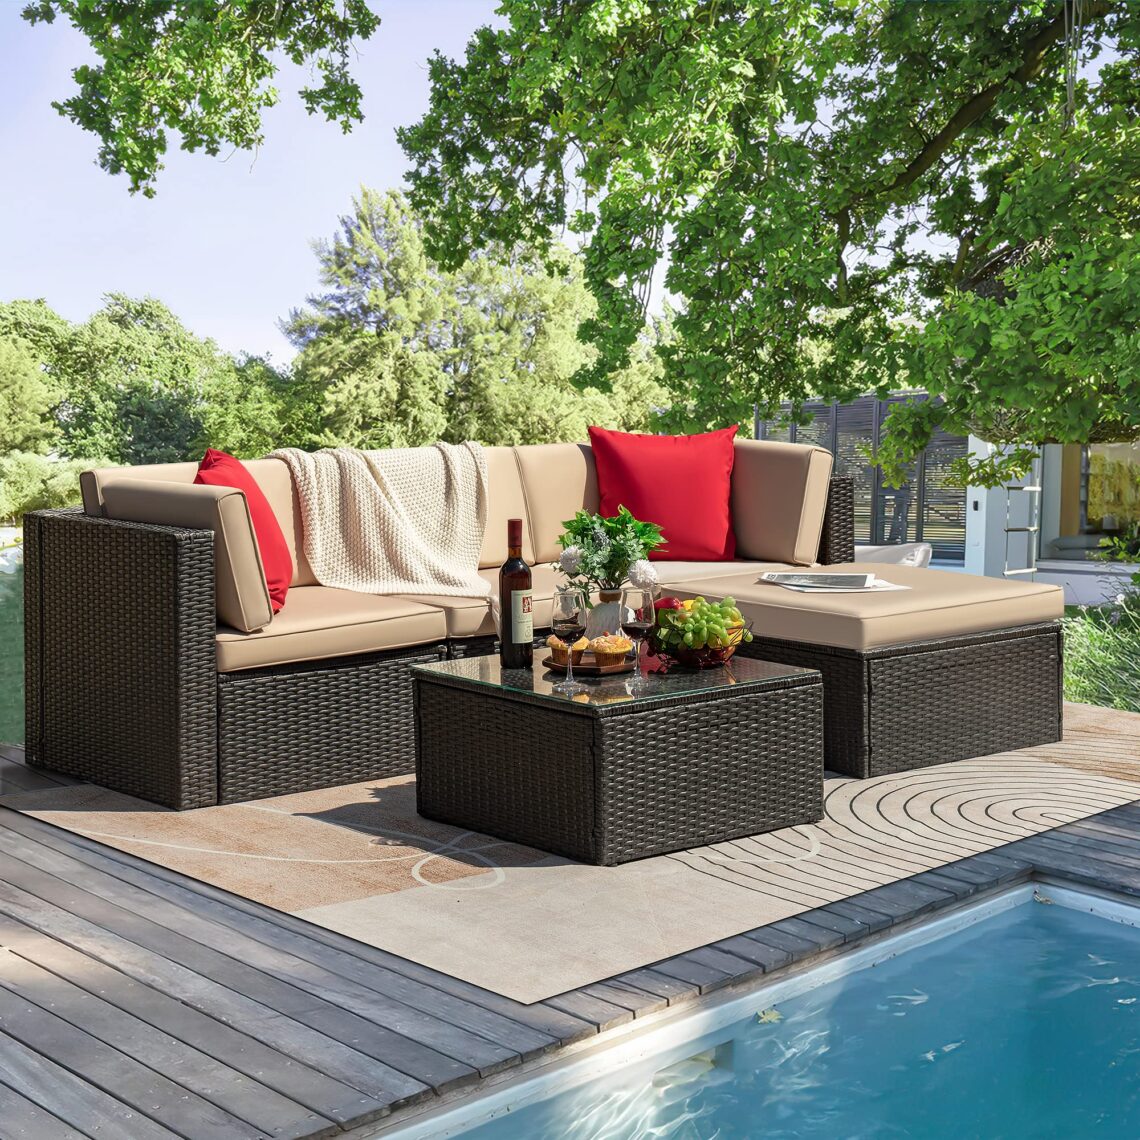 Revamp Your Backyard: 10 Outdoor Furniture Ideas for Summer 3